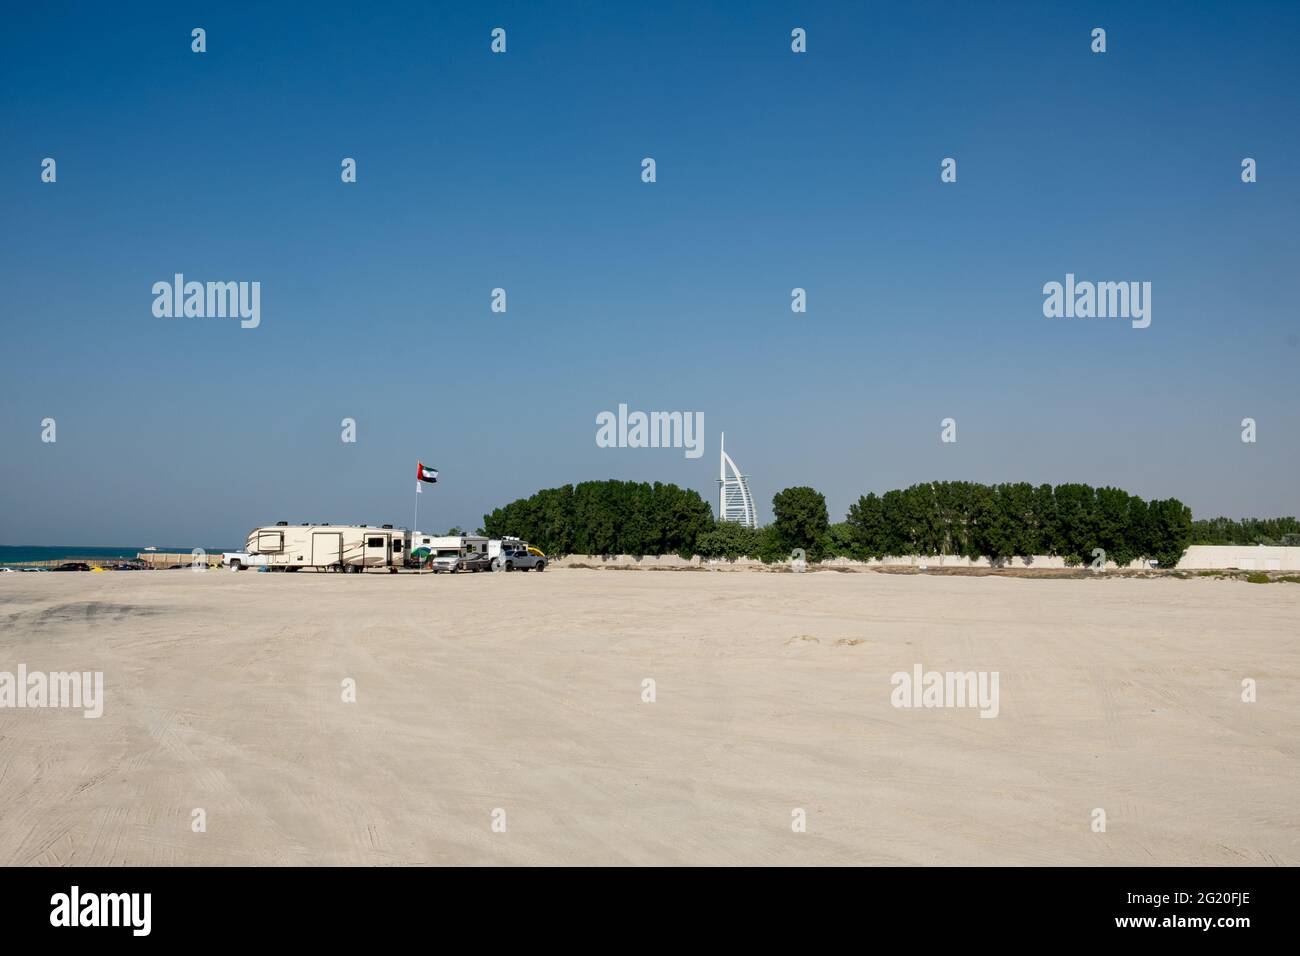 Campers on the beach with the white sail of Burj Al Arab visible in the distance. Dubai, UAE. Stock Photo